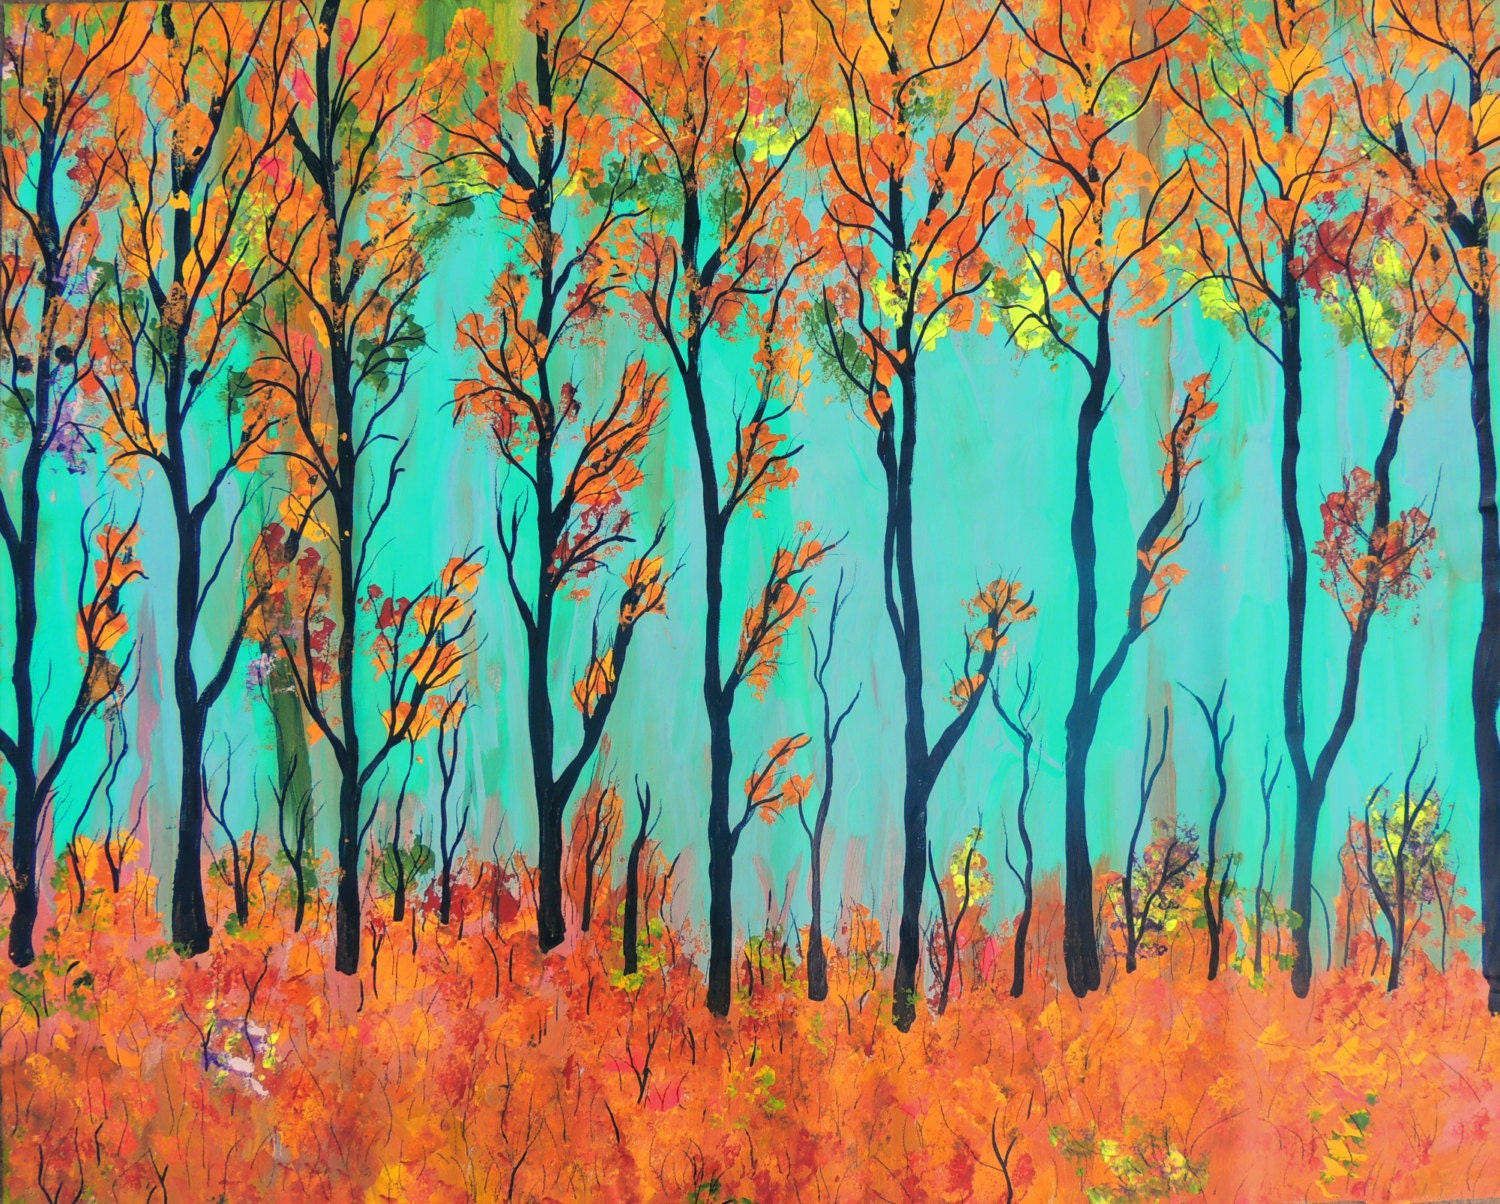 SONG of INDIAN SUMMER  Large Abstract Tree Art Original Landscape Painting by suzeee - SUZEEE